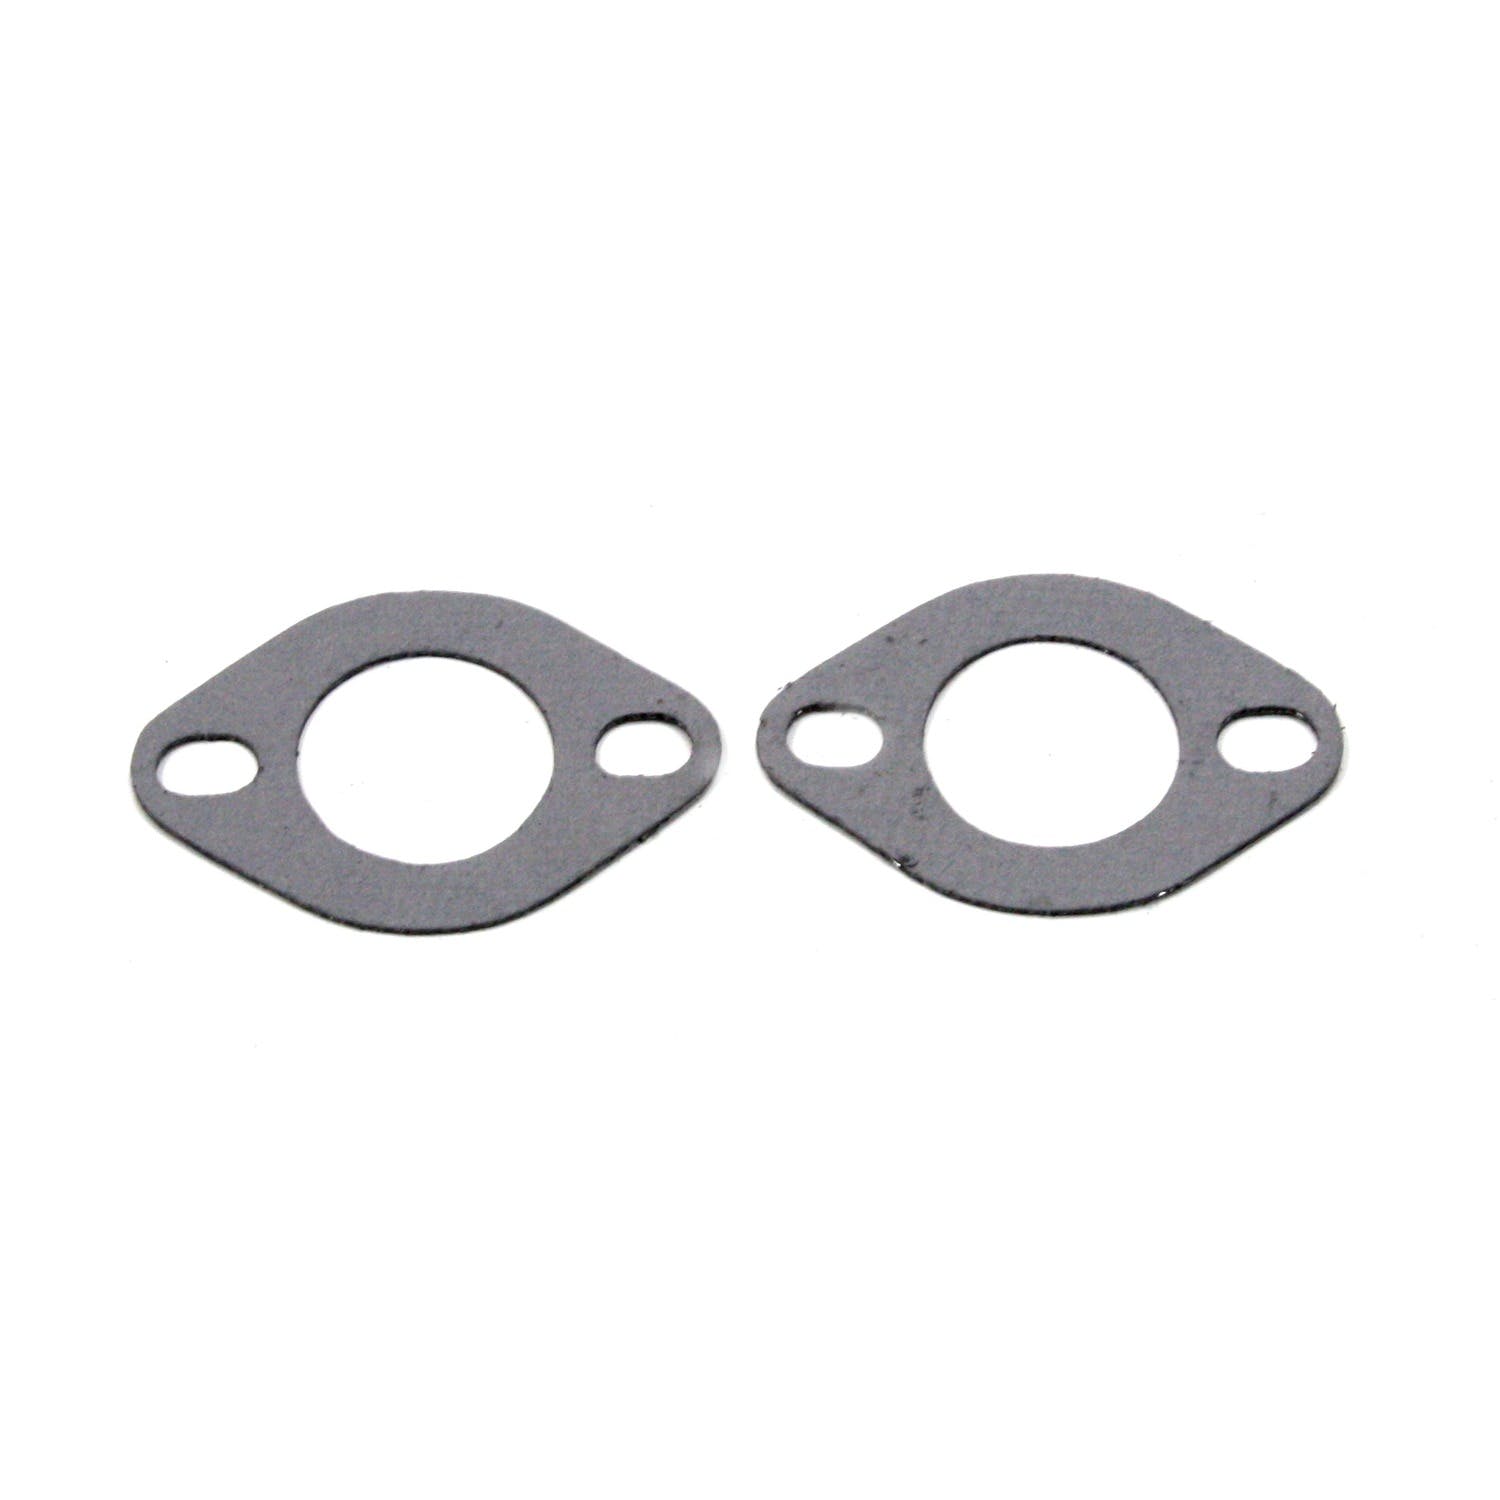 Patriot Exhaust H7953 2 inch Collector Gasket Universal Pair